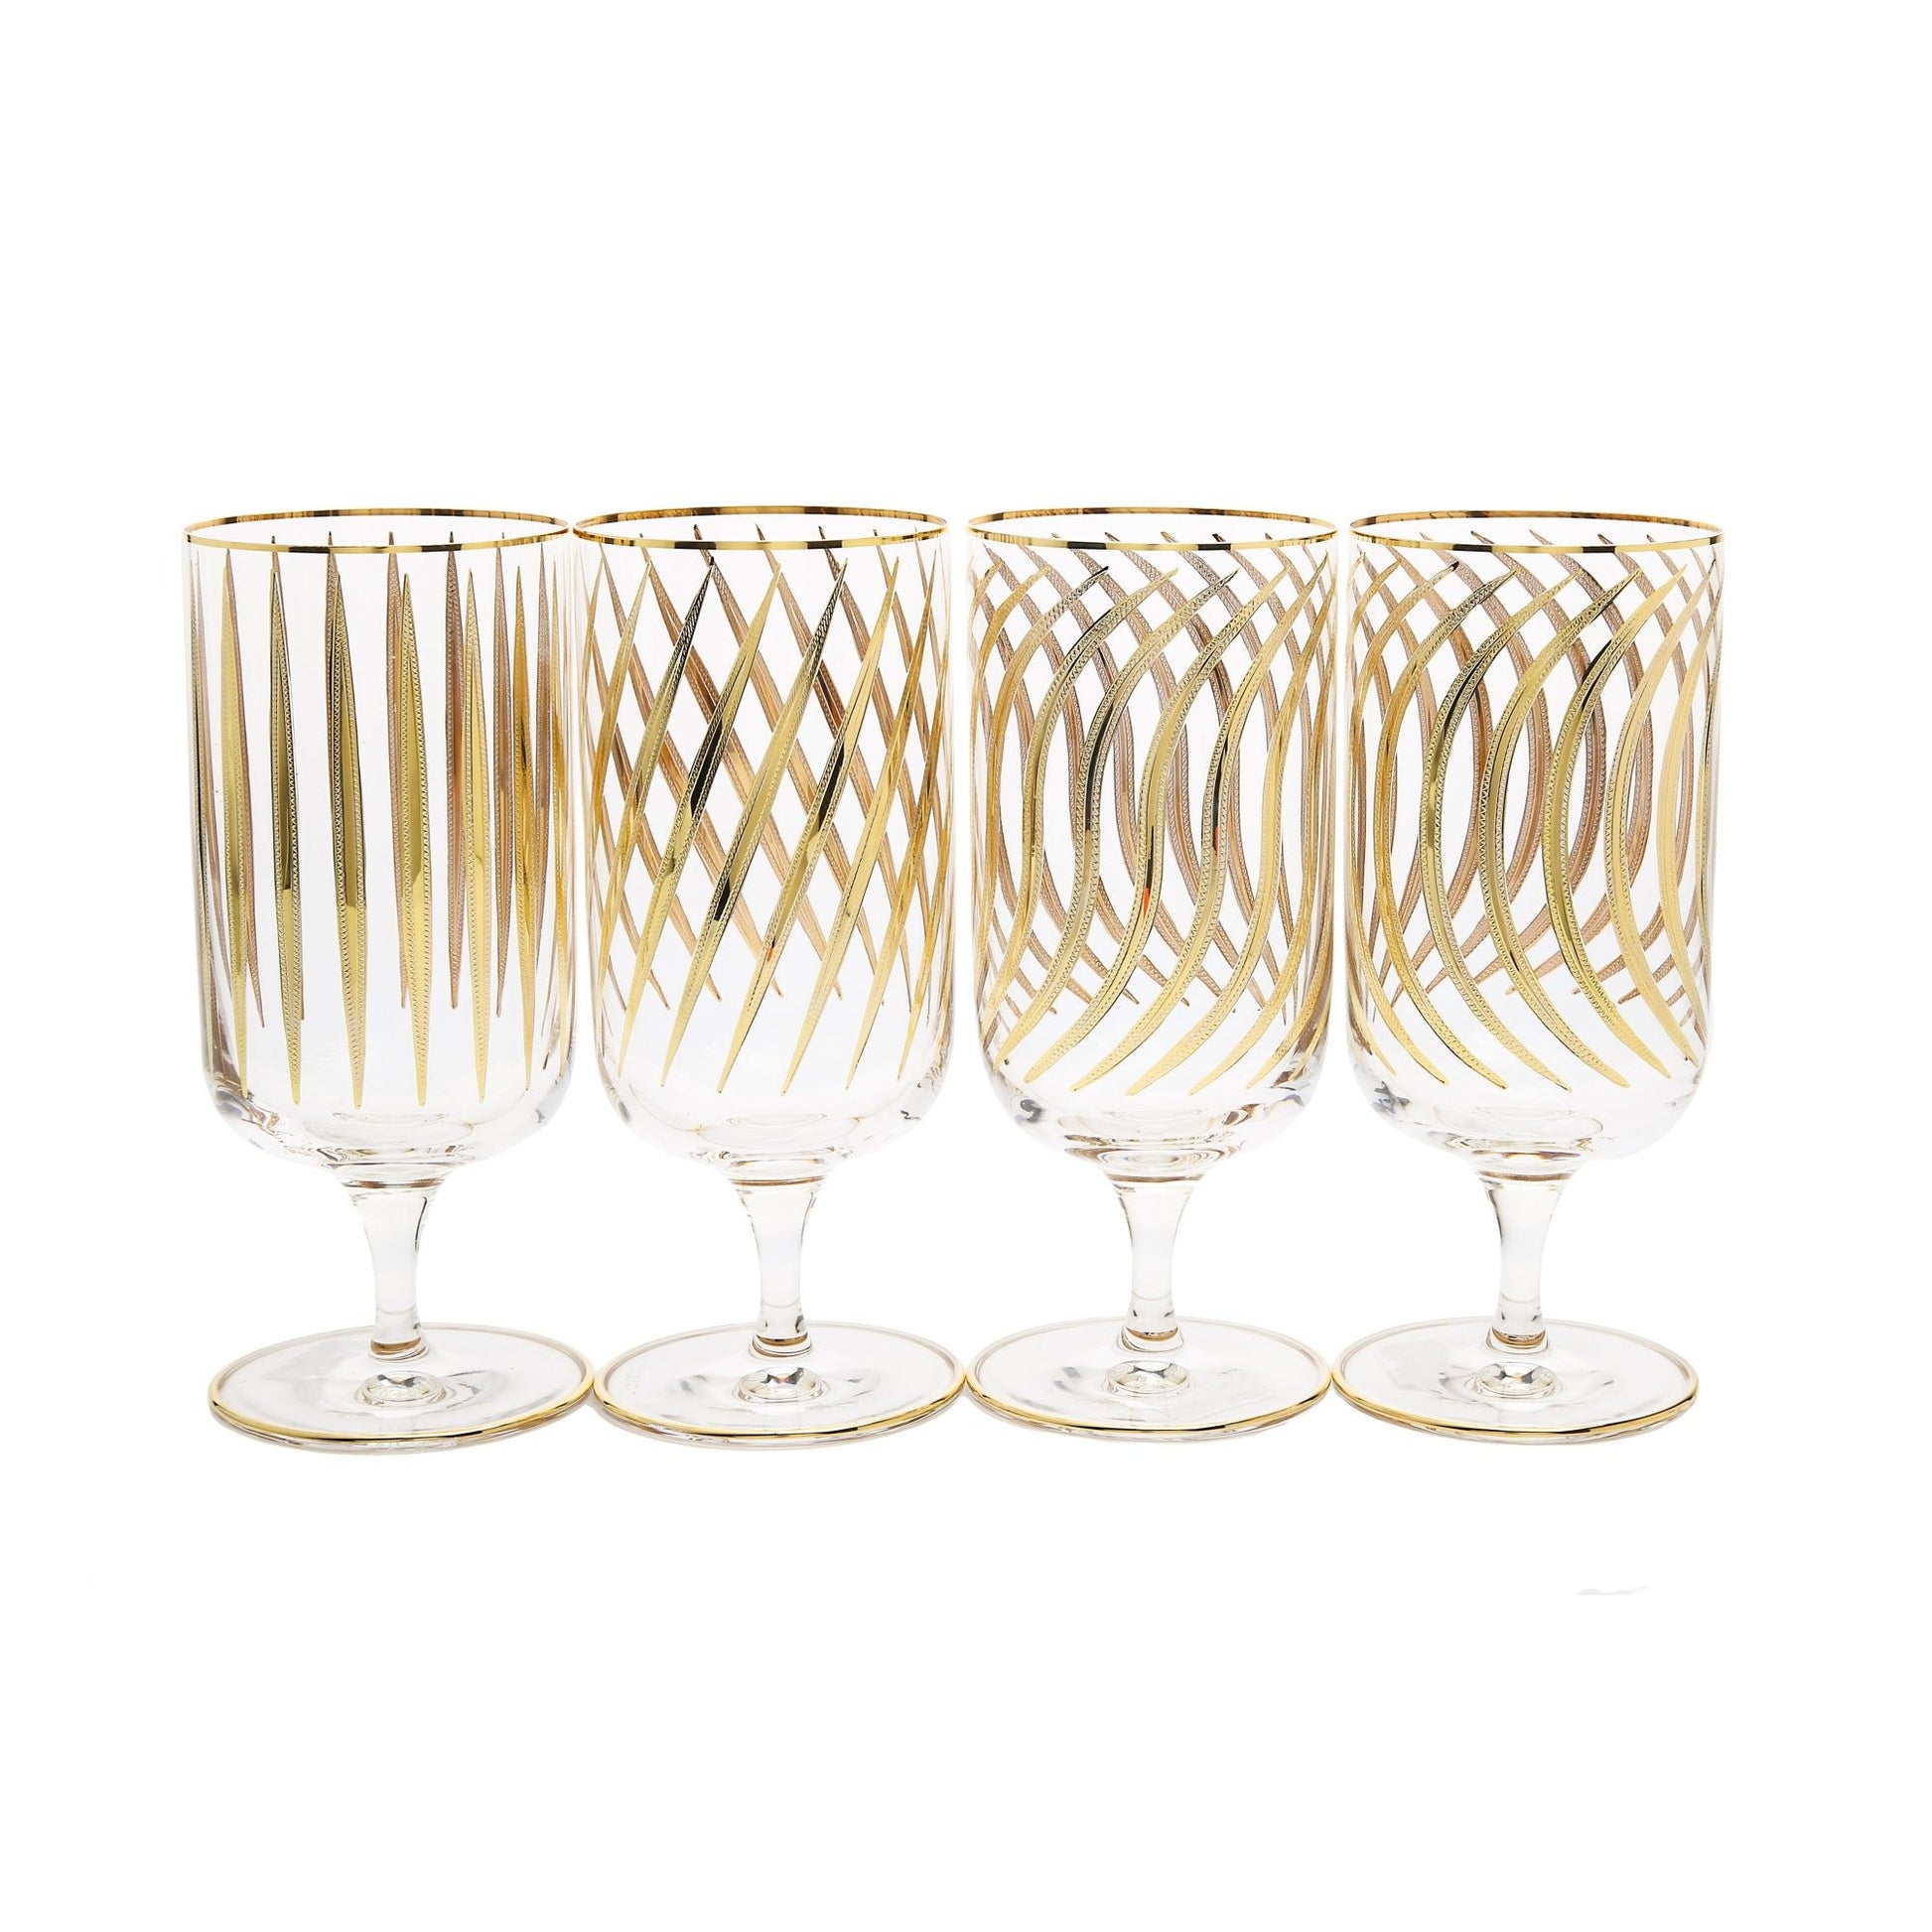 Classic Touch Set Of 4 Mix And Match Liquor Glasses With 24K Gold Design by Classic Touch Decor